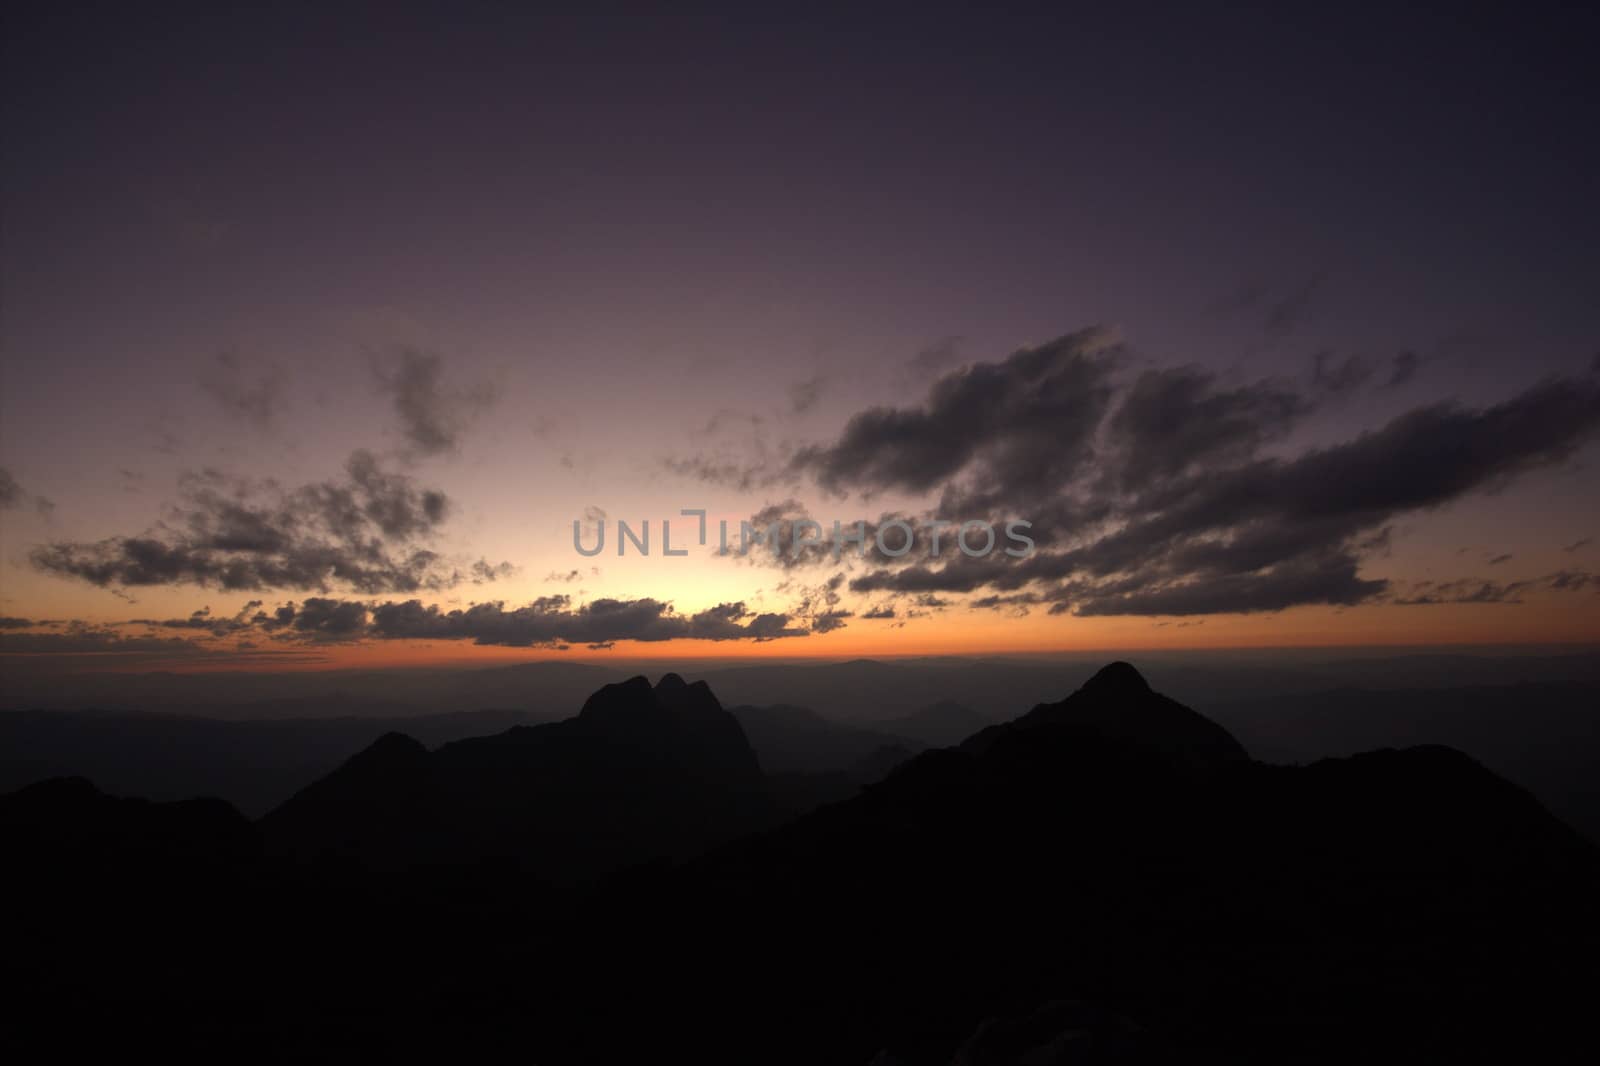 Sunset at the top of the hill at Doi Luang, Chiang Dao, Thailand